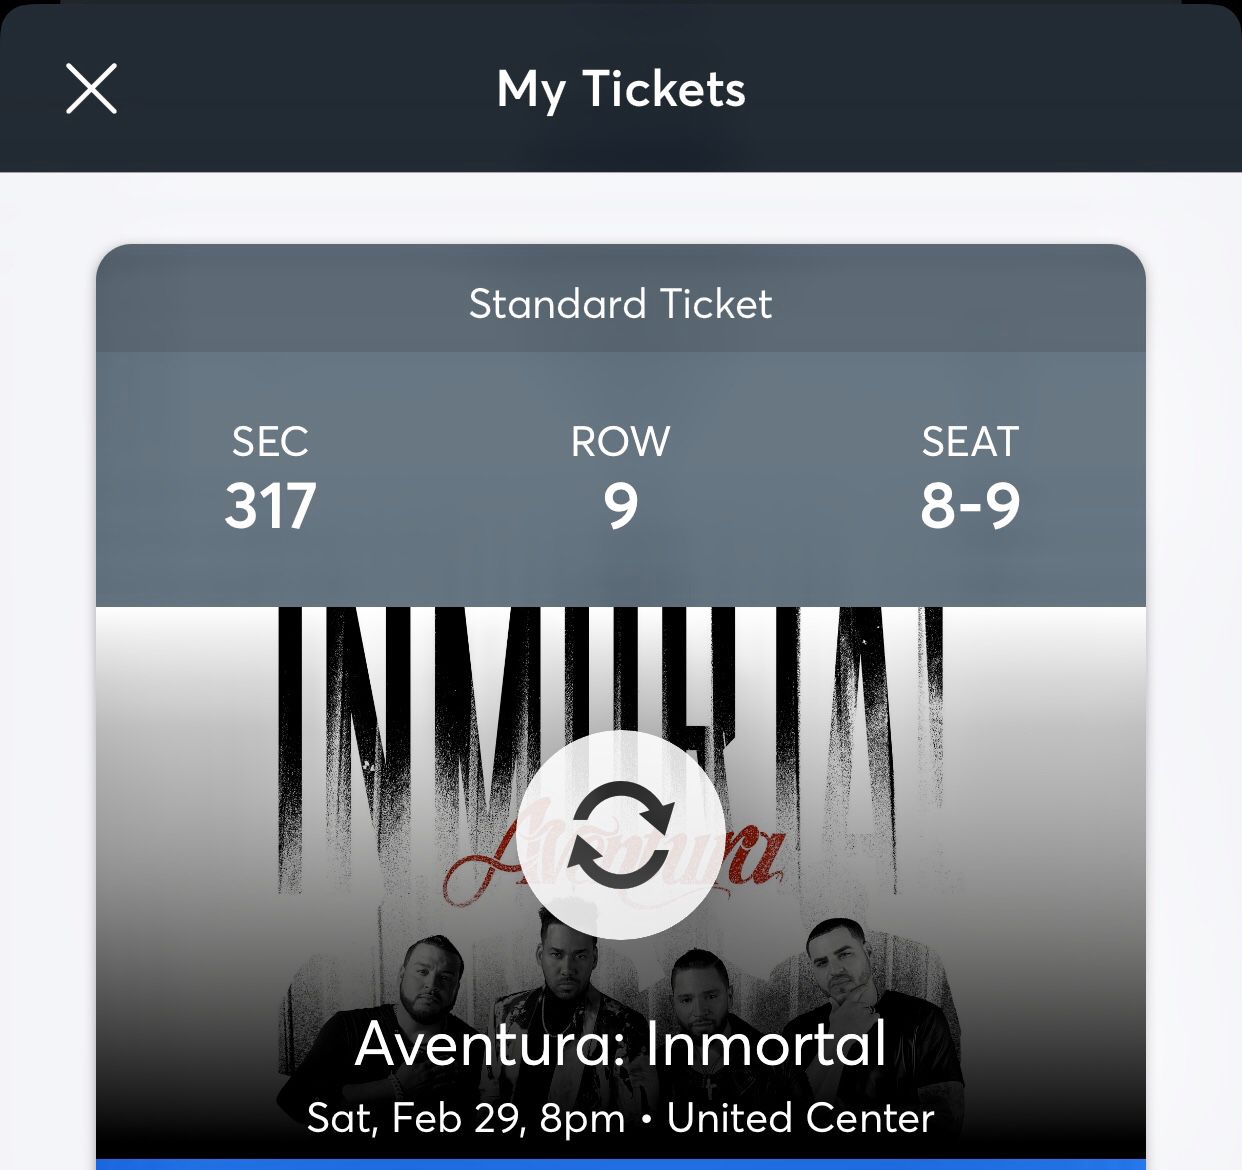 Aventura tickets for Saturday 29th at United Center